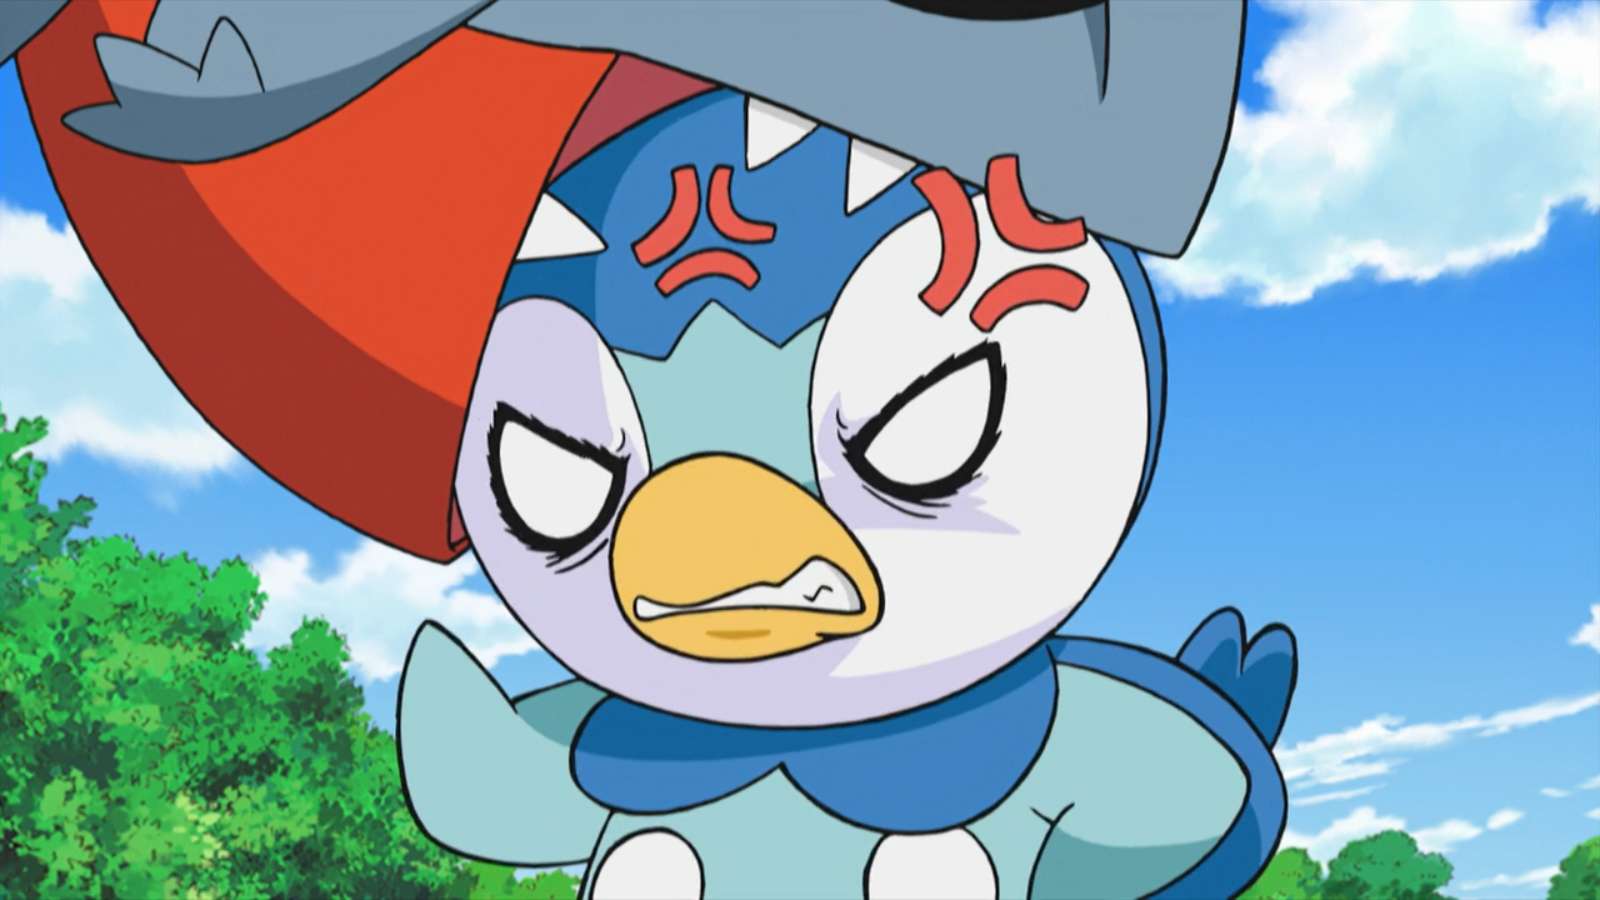 Angry Piplup with Gible biting its head in the Pokemon anime